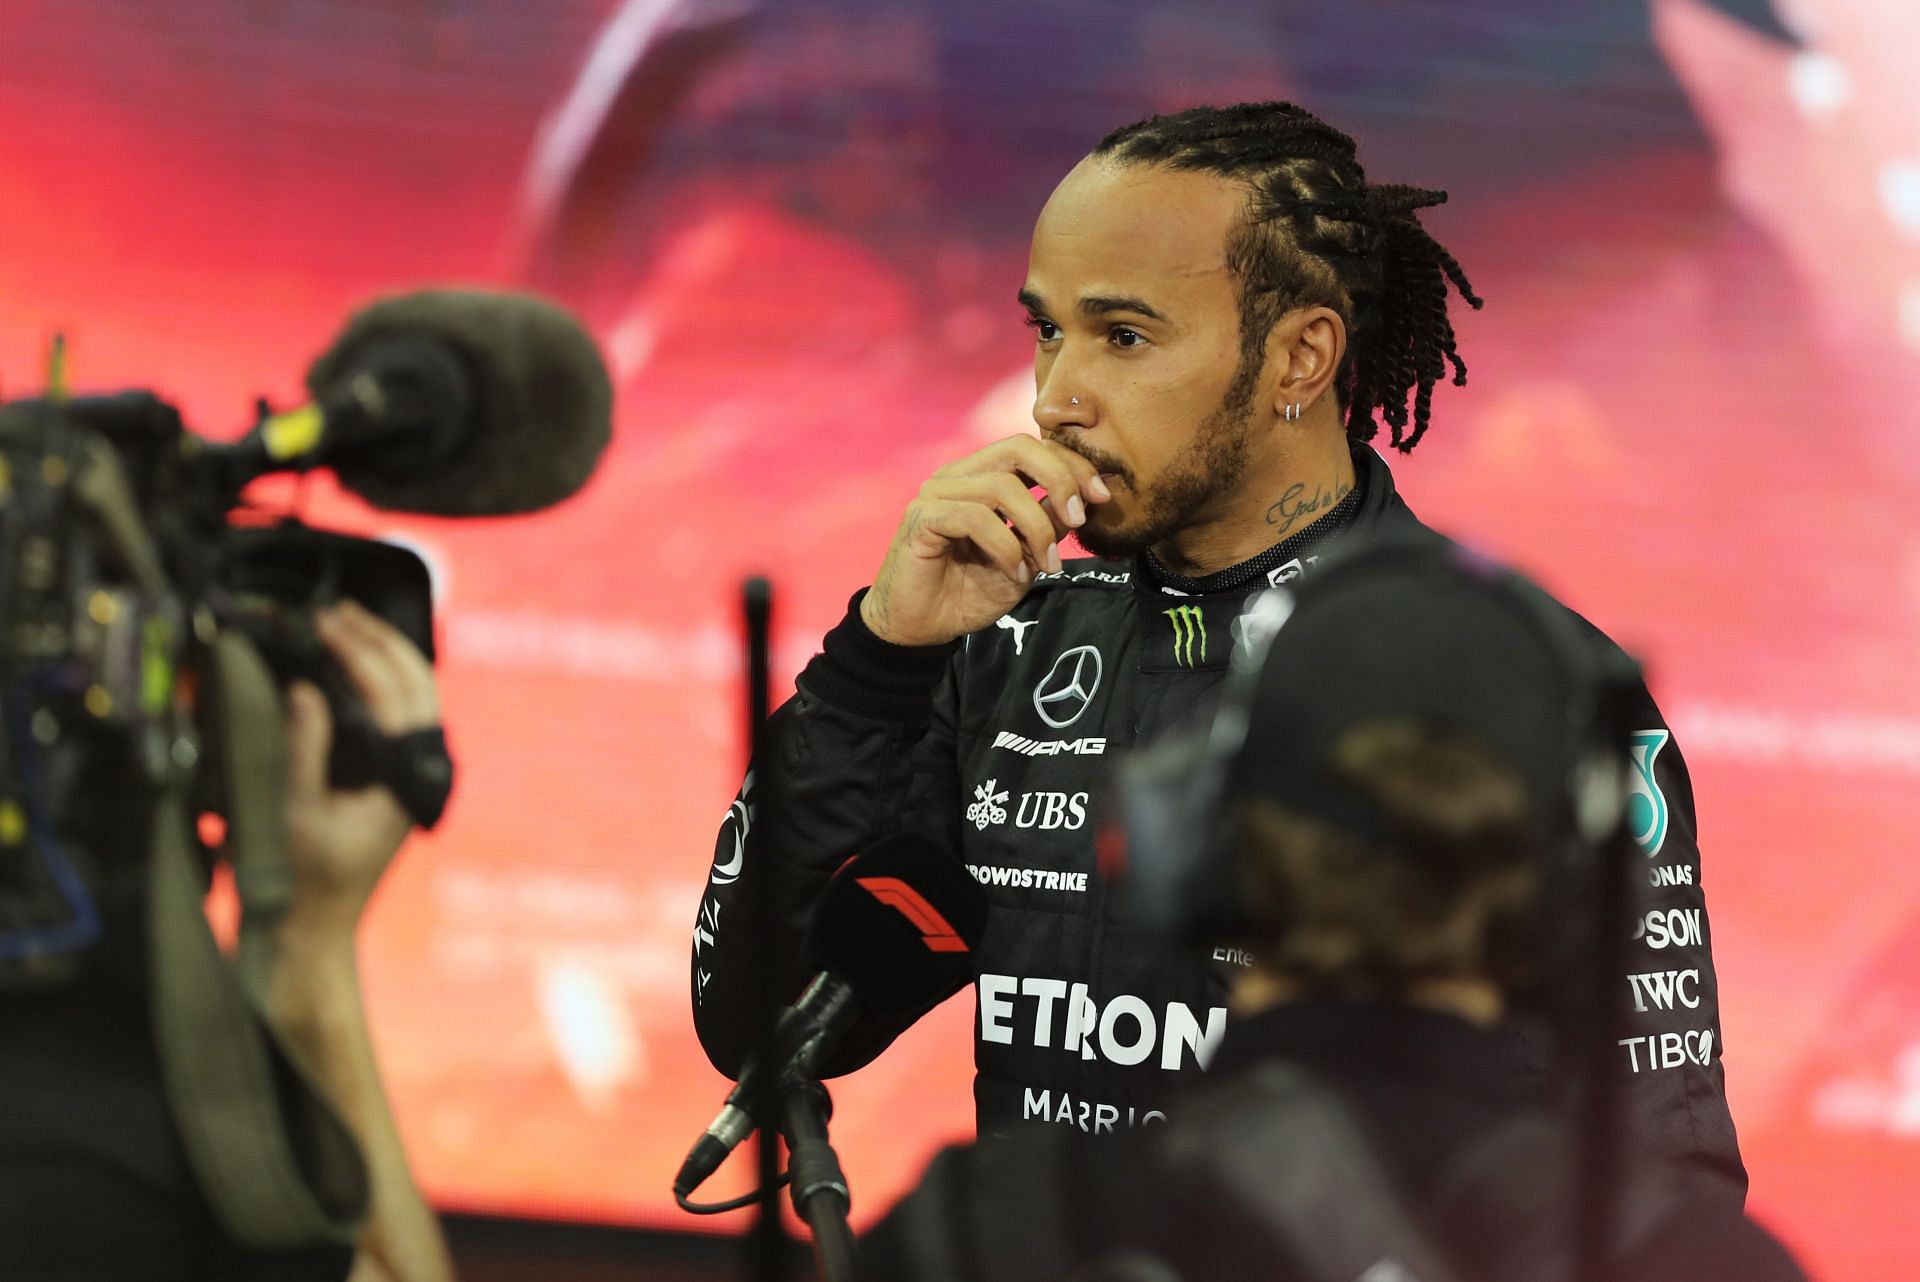 Lewis Hamilton talks to the media in parc ferme during the Abu Dhabi GP podium ceremony. (Photo by Kamran Jebreili - Pool/Getty Images)